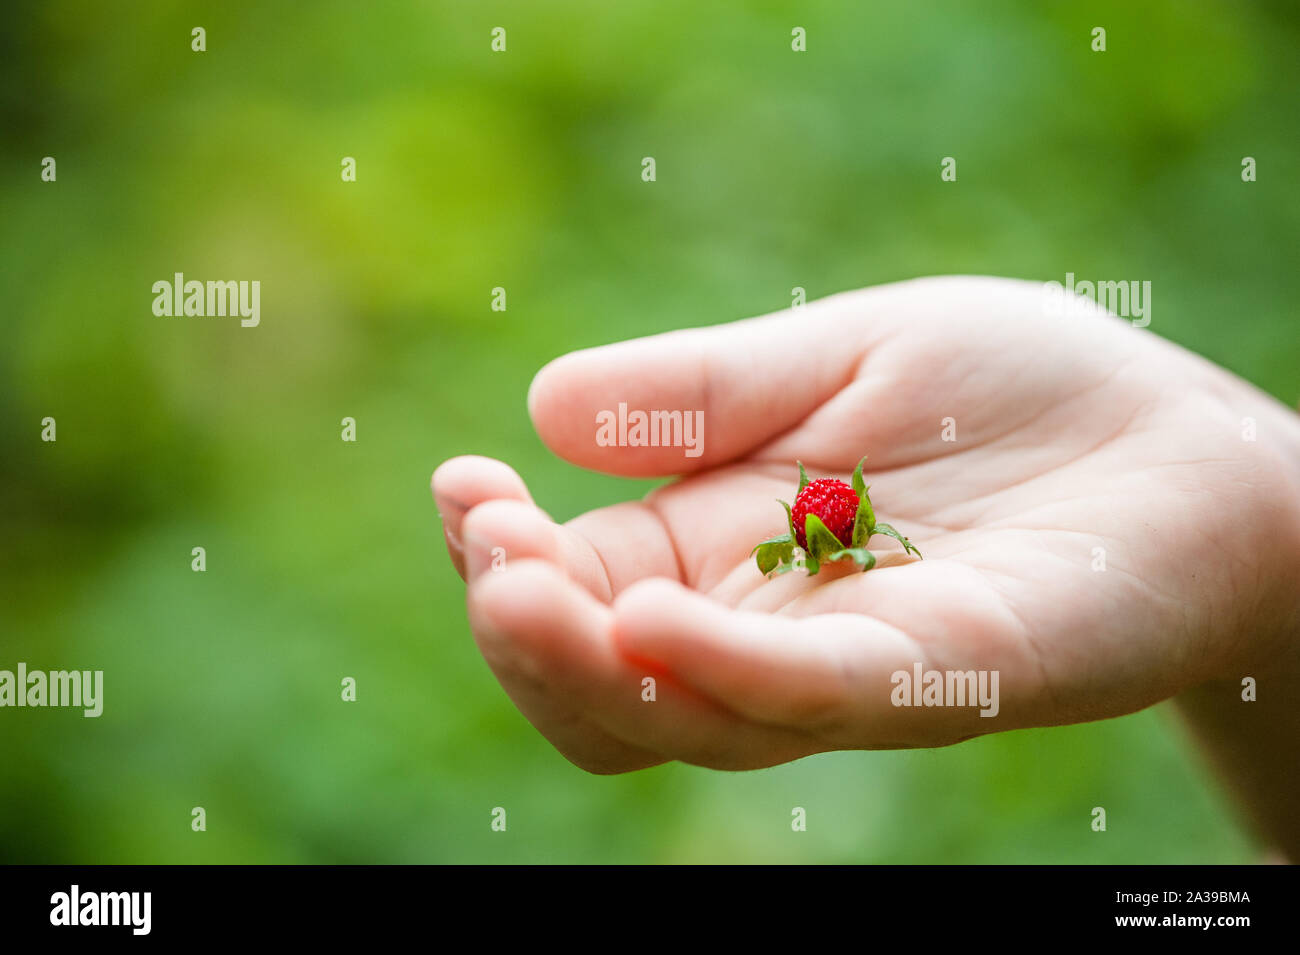 A red juicy wild berry on a child hand Stock Photo